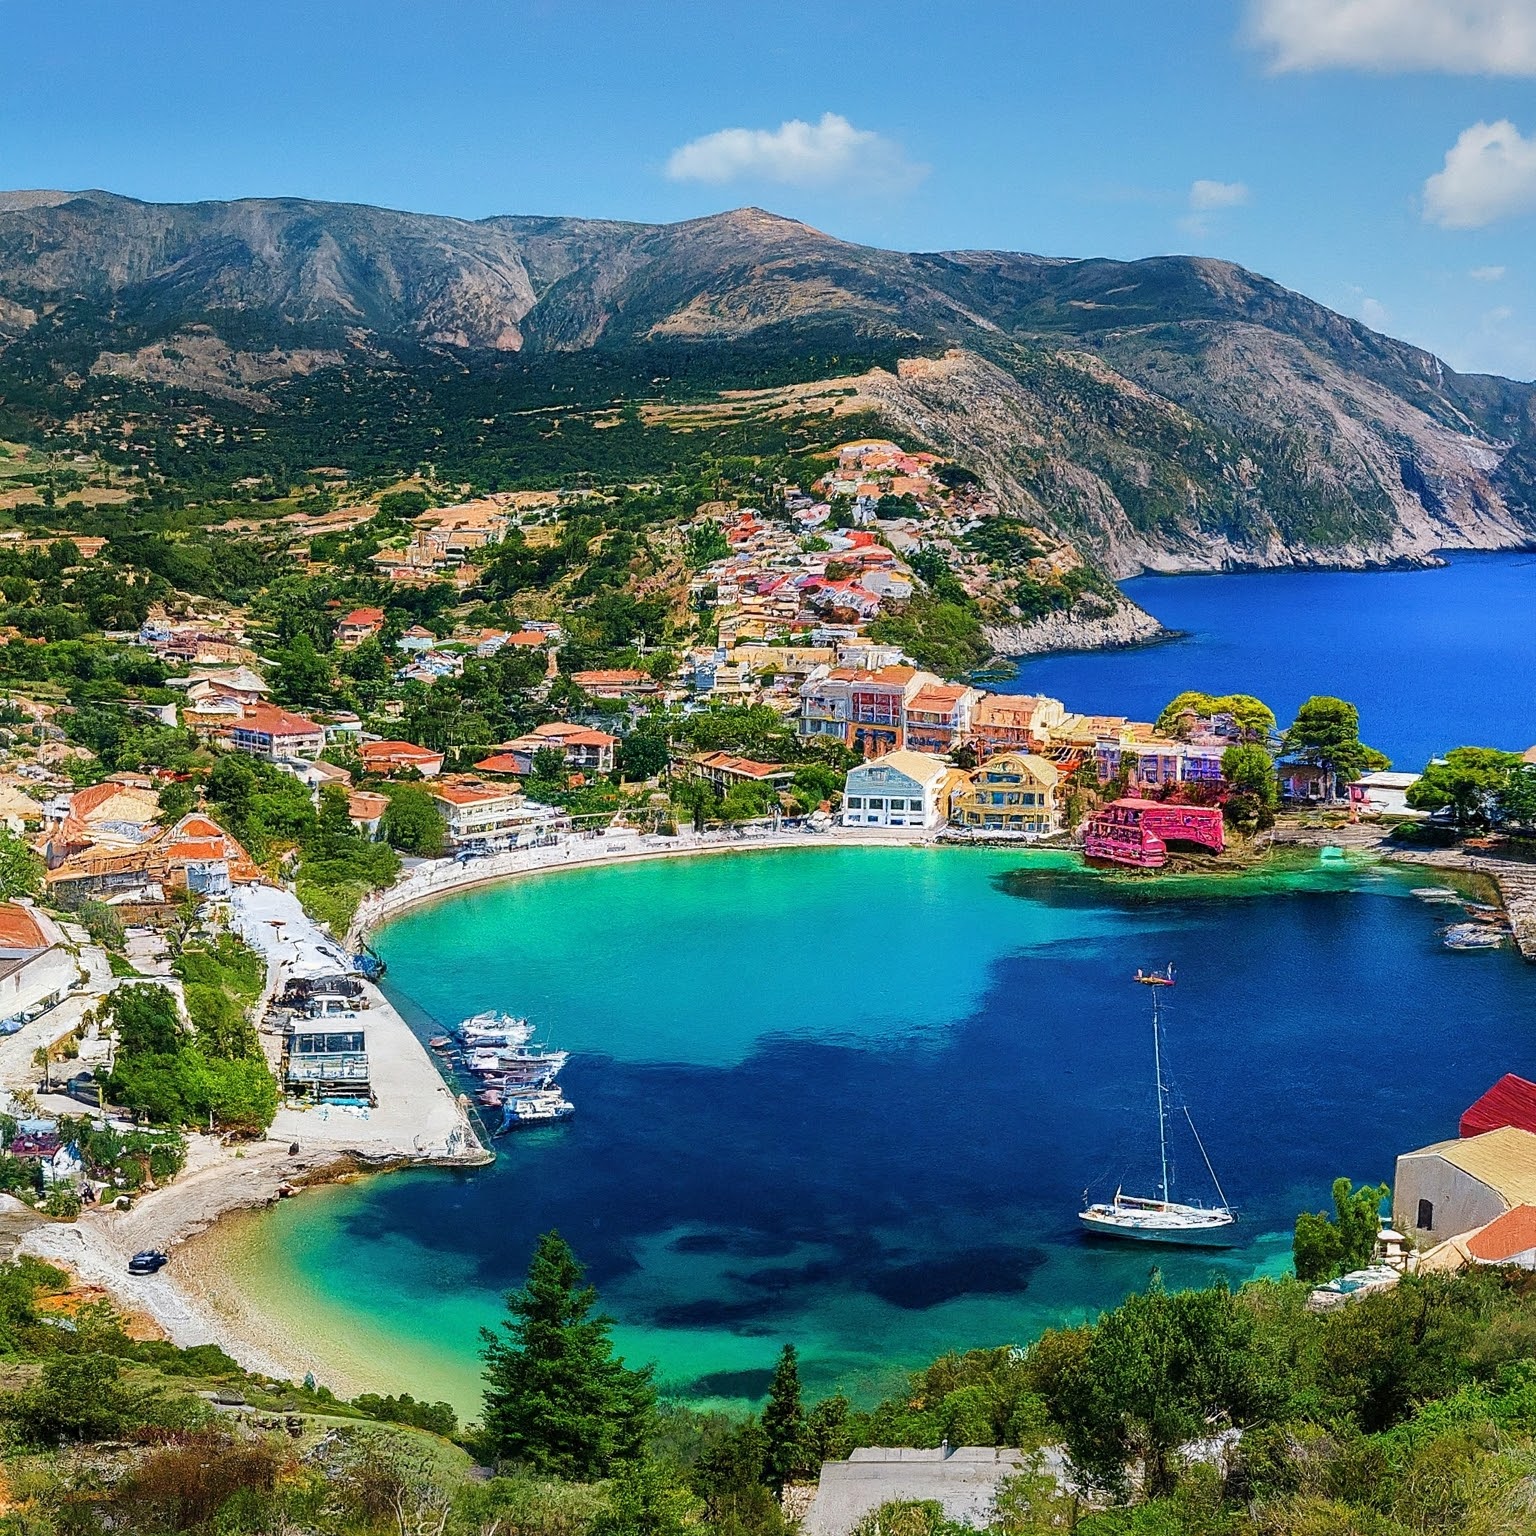 Assos village on Kefalonia Island, Greece, with colorful houses overlooking the Ionian Sea.